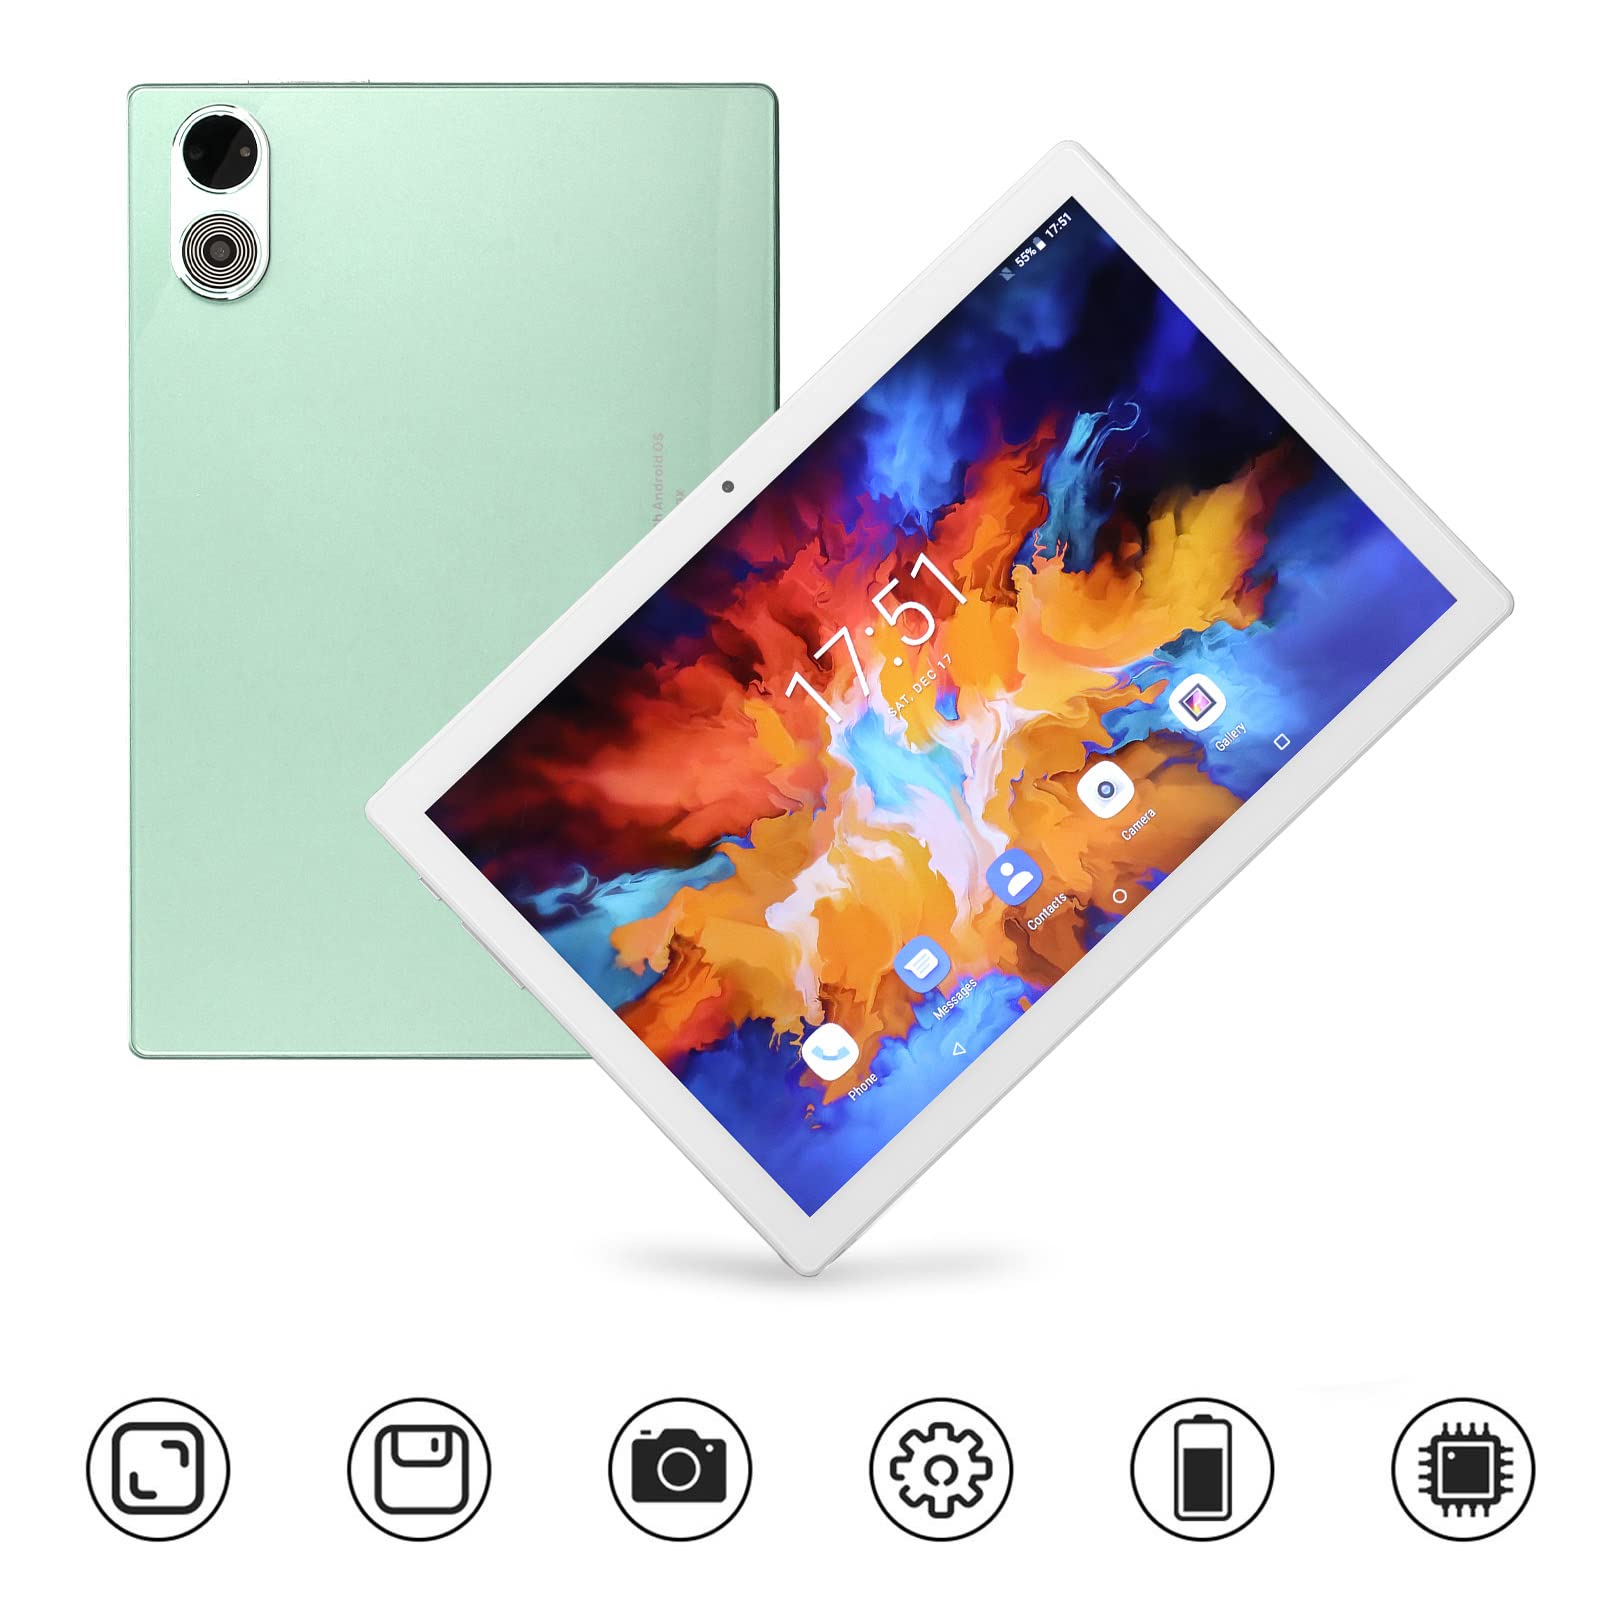 HD 10.1 Inch Tablet, Octa Core 512GB Expandable 8GB RAM 128GB ROM 20MP Rear Camera 4G LTE Tablet for Office for Learning (Green)